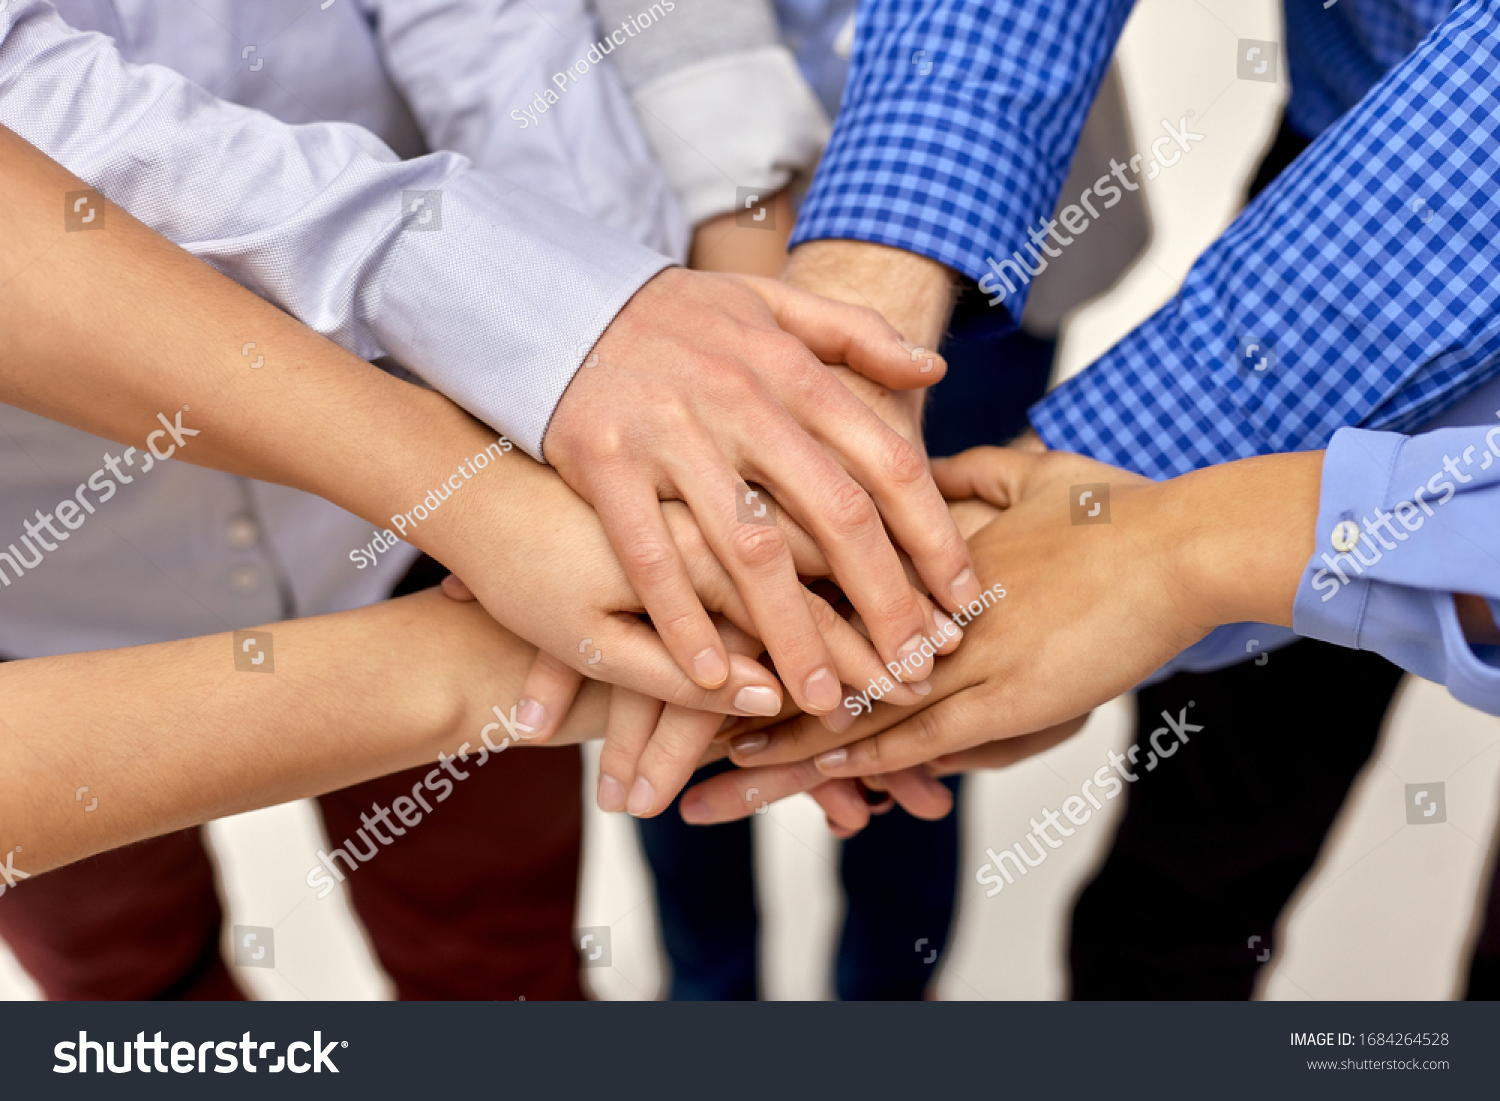 gesture, people and teamwork concept - close up of business team, friends or students stacking hands #1684264528